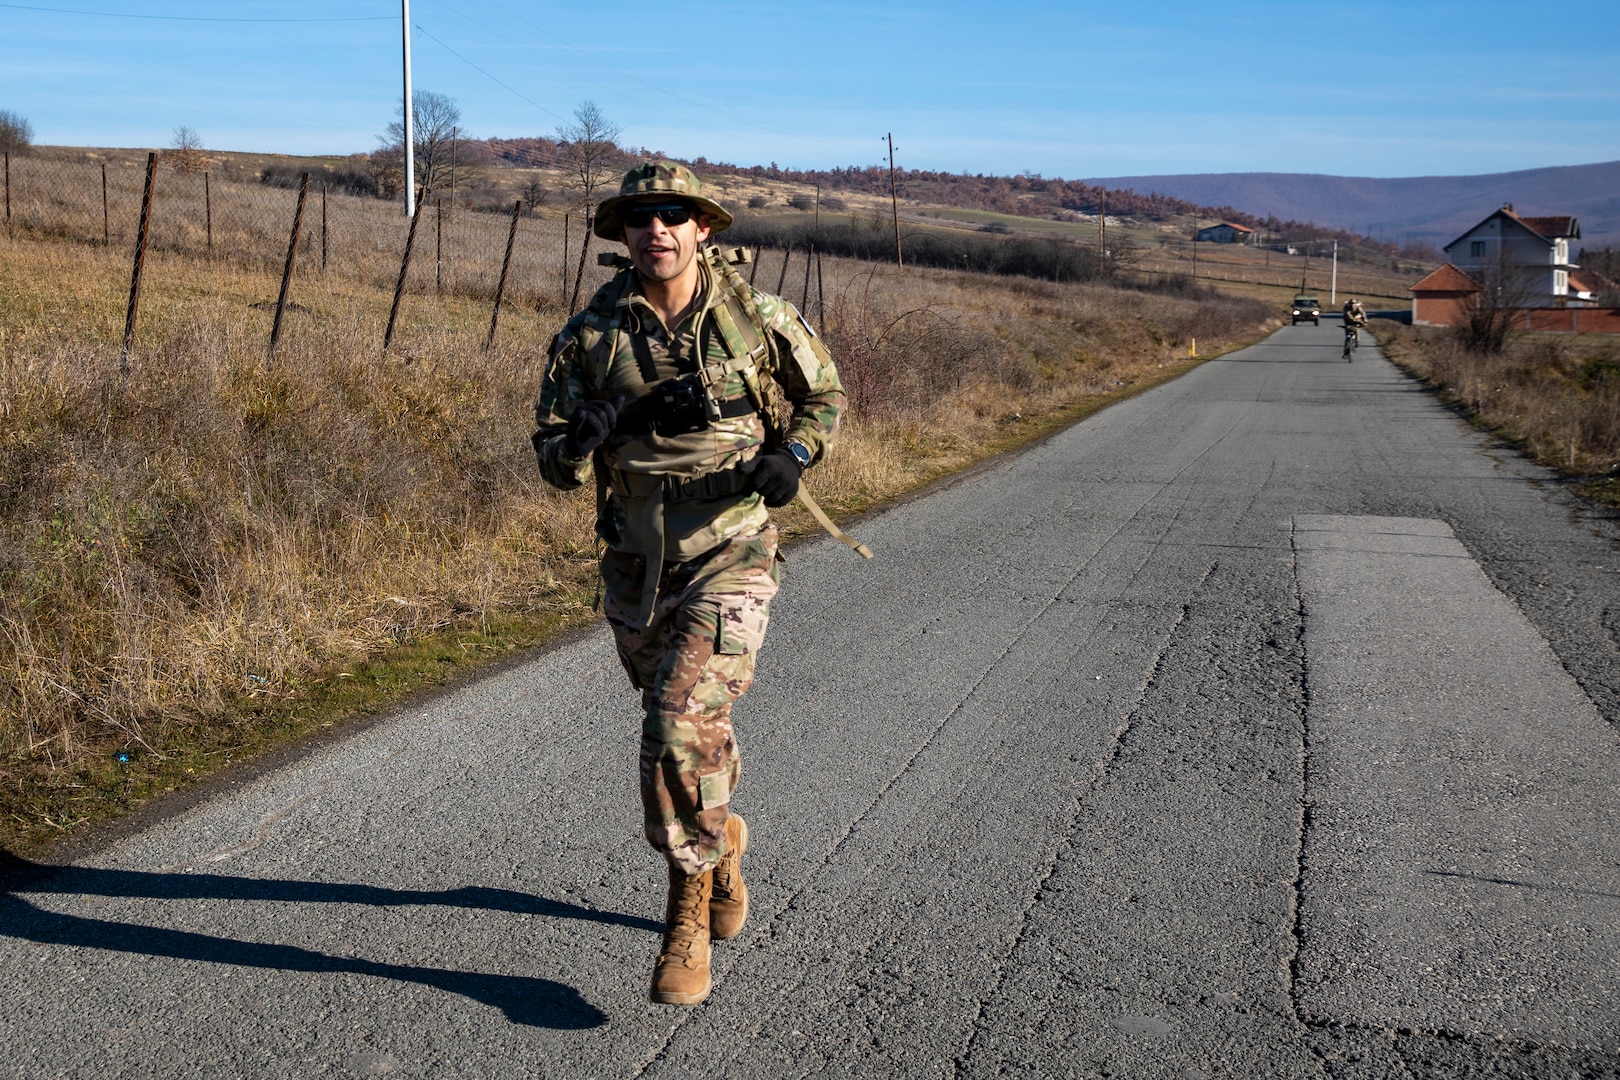 Five hundred and forty-five Soldiers from 21 nations across Kosovo Force Regional Command-East (KFOR RC-E) participate in the traditional Danish Contingency (DANCON) March of 24.27 kilometers near Camp Novo Selo, Kosovo, Jan. 7, 2023.